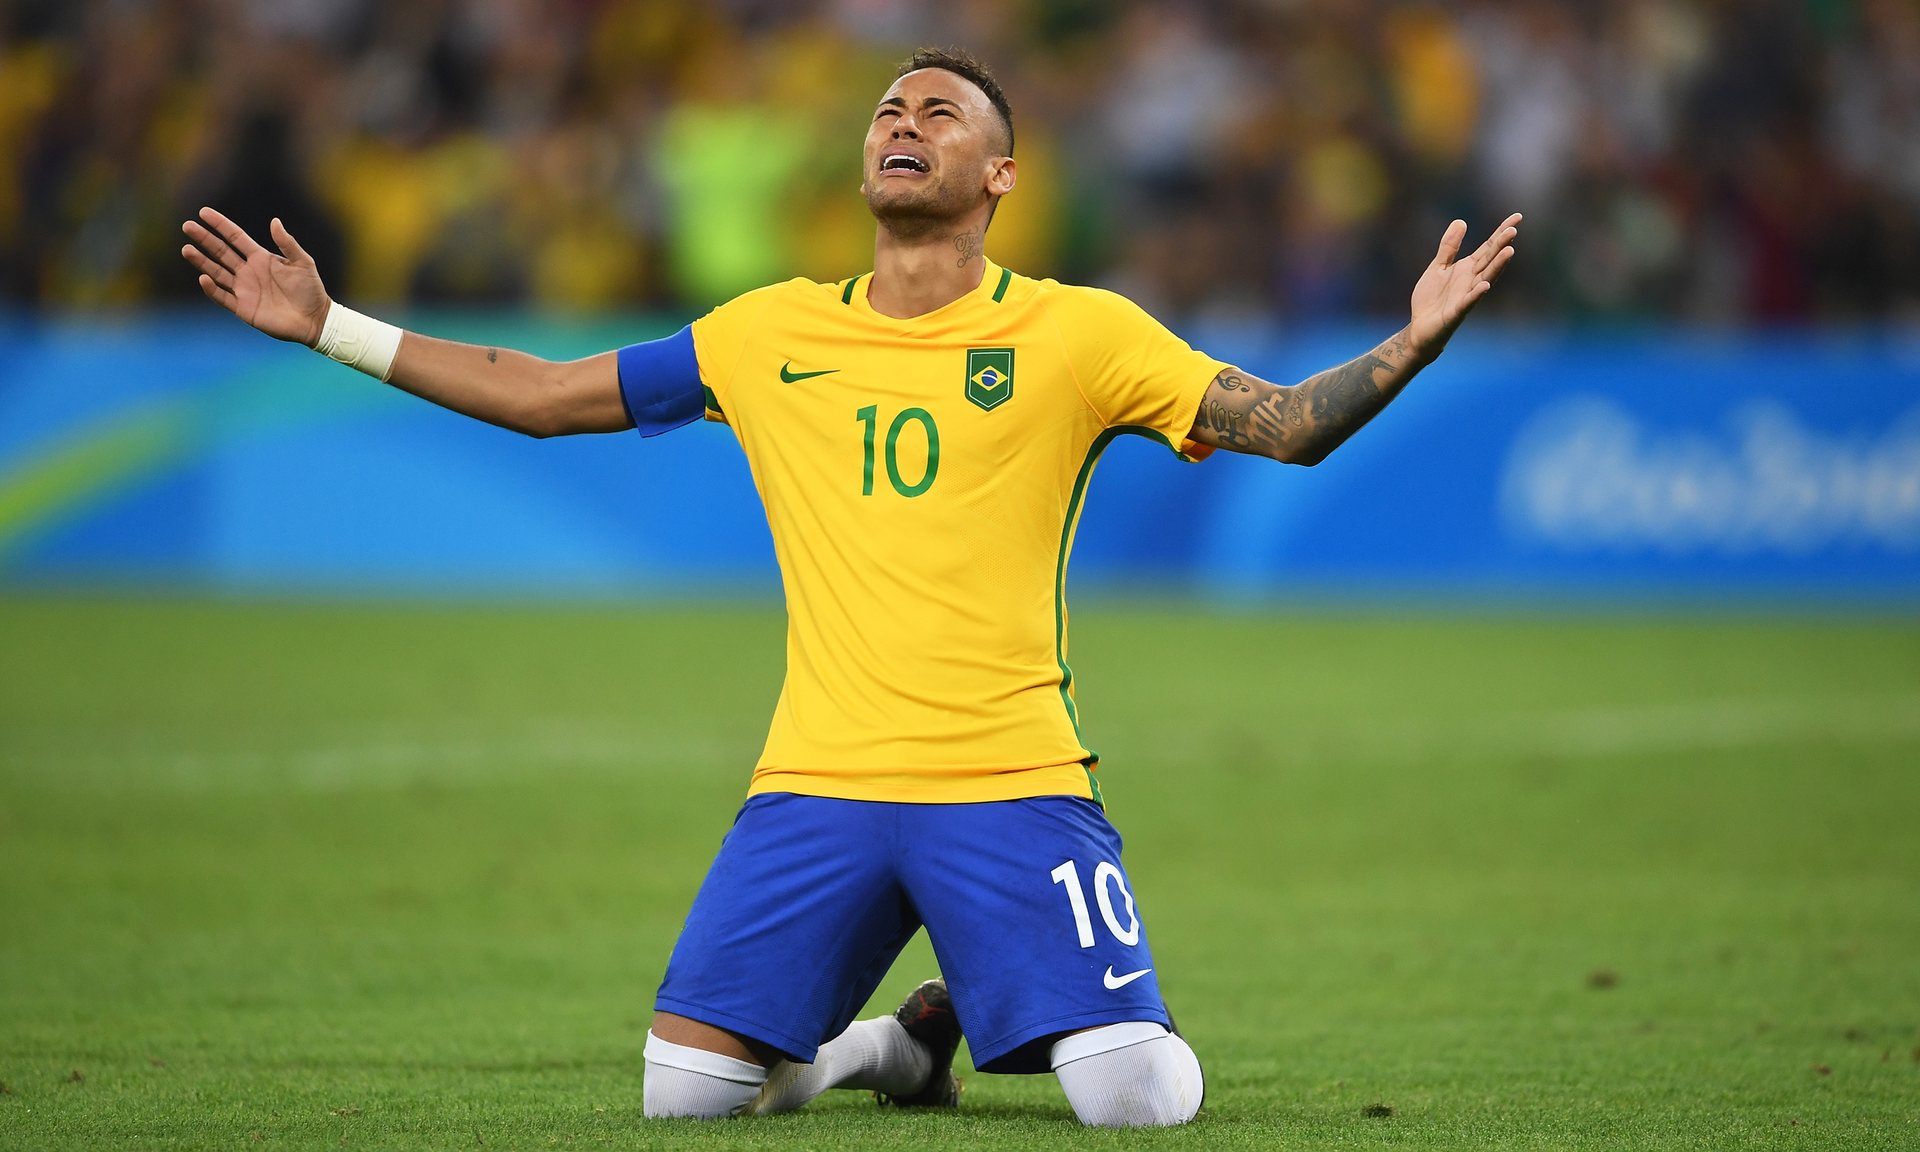 Neymar wins gold for Brazil in the Olympic games in 2016